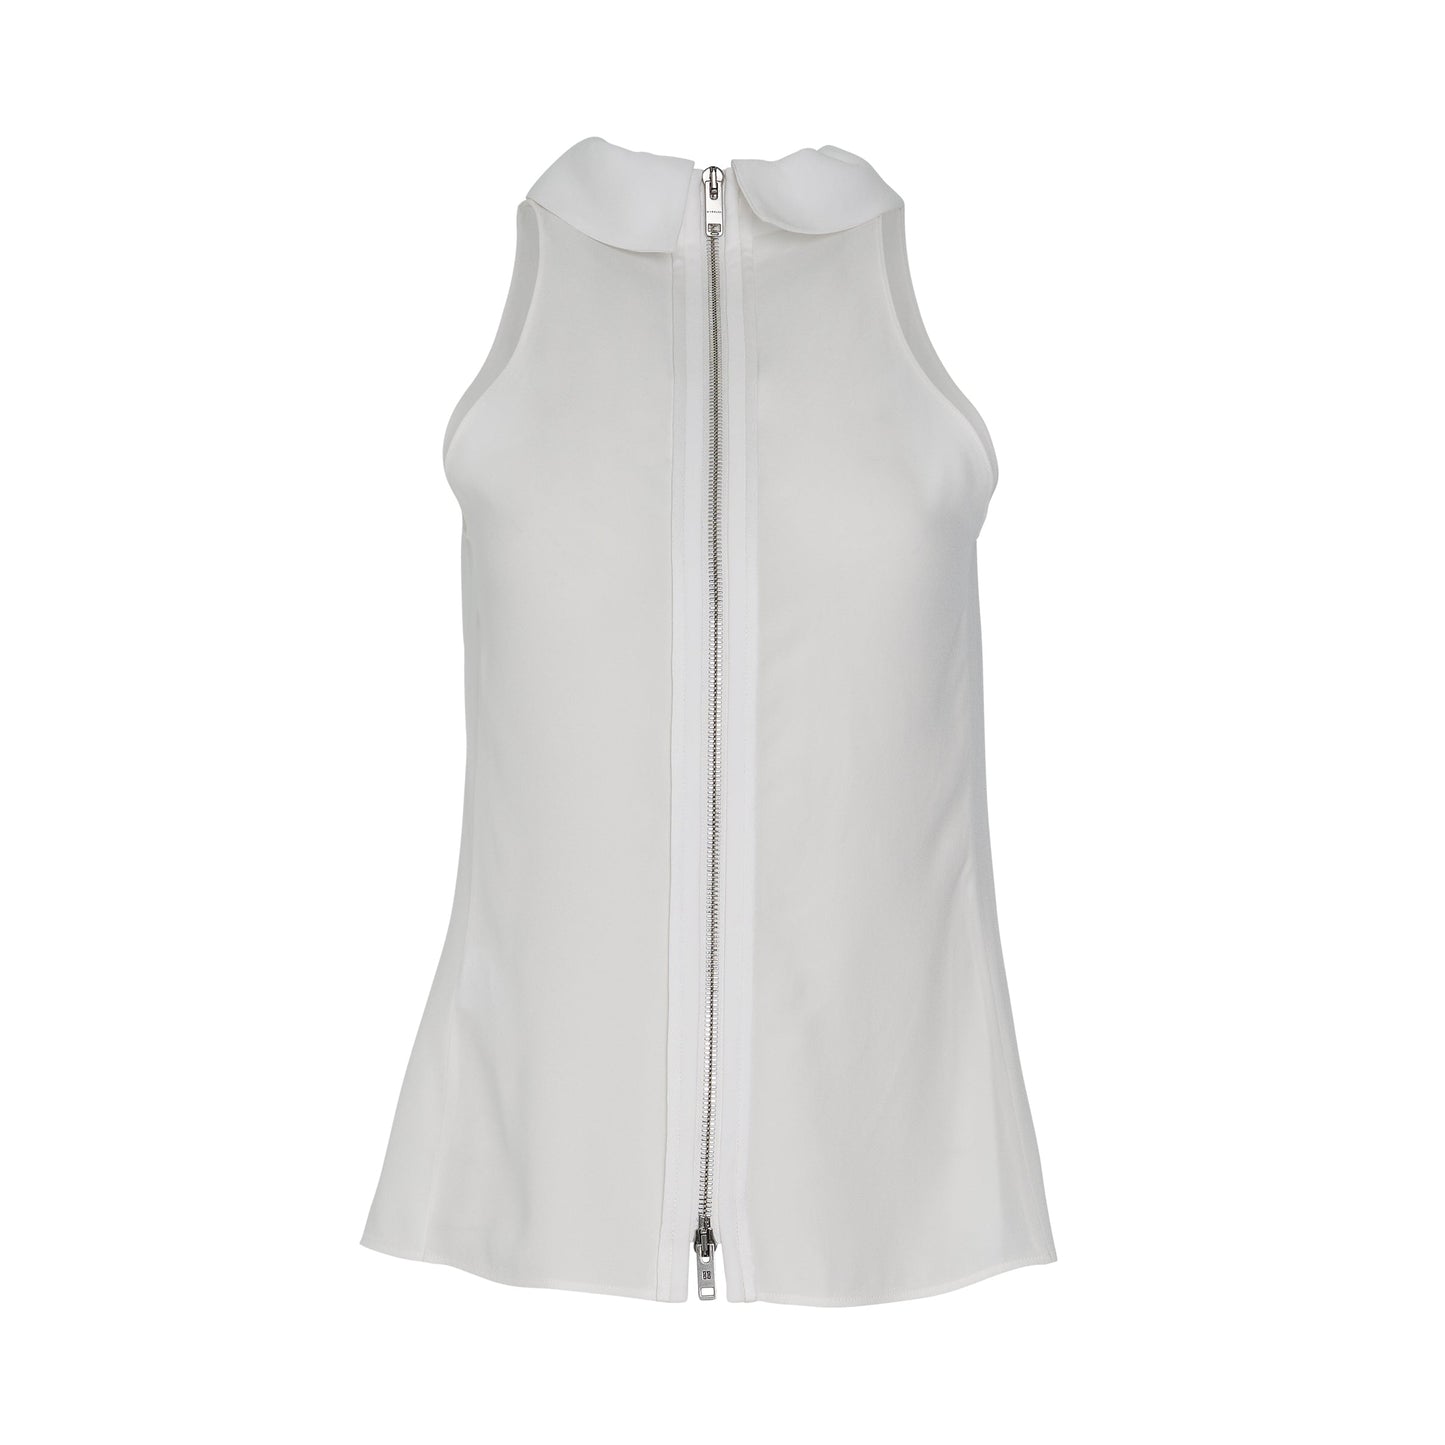 Sleeveless Top in Off White